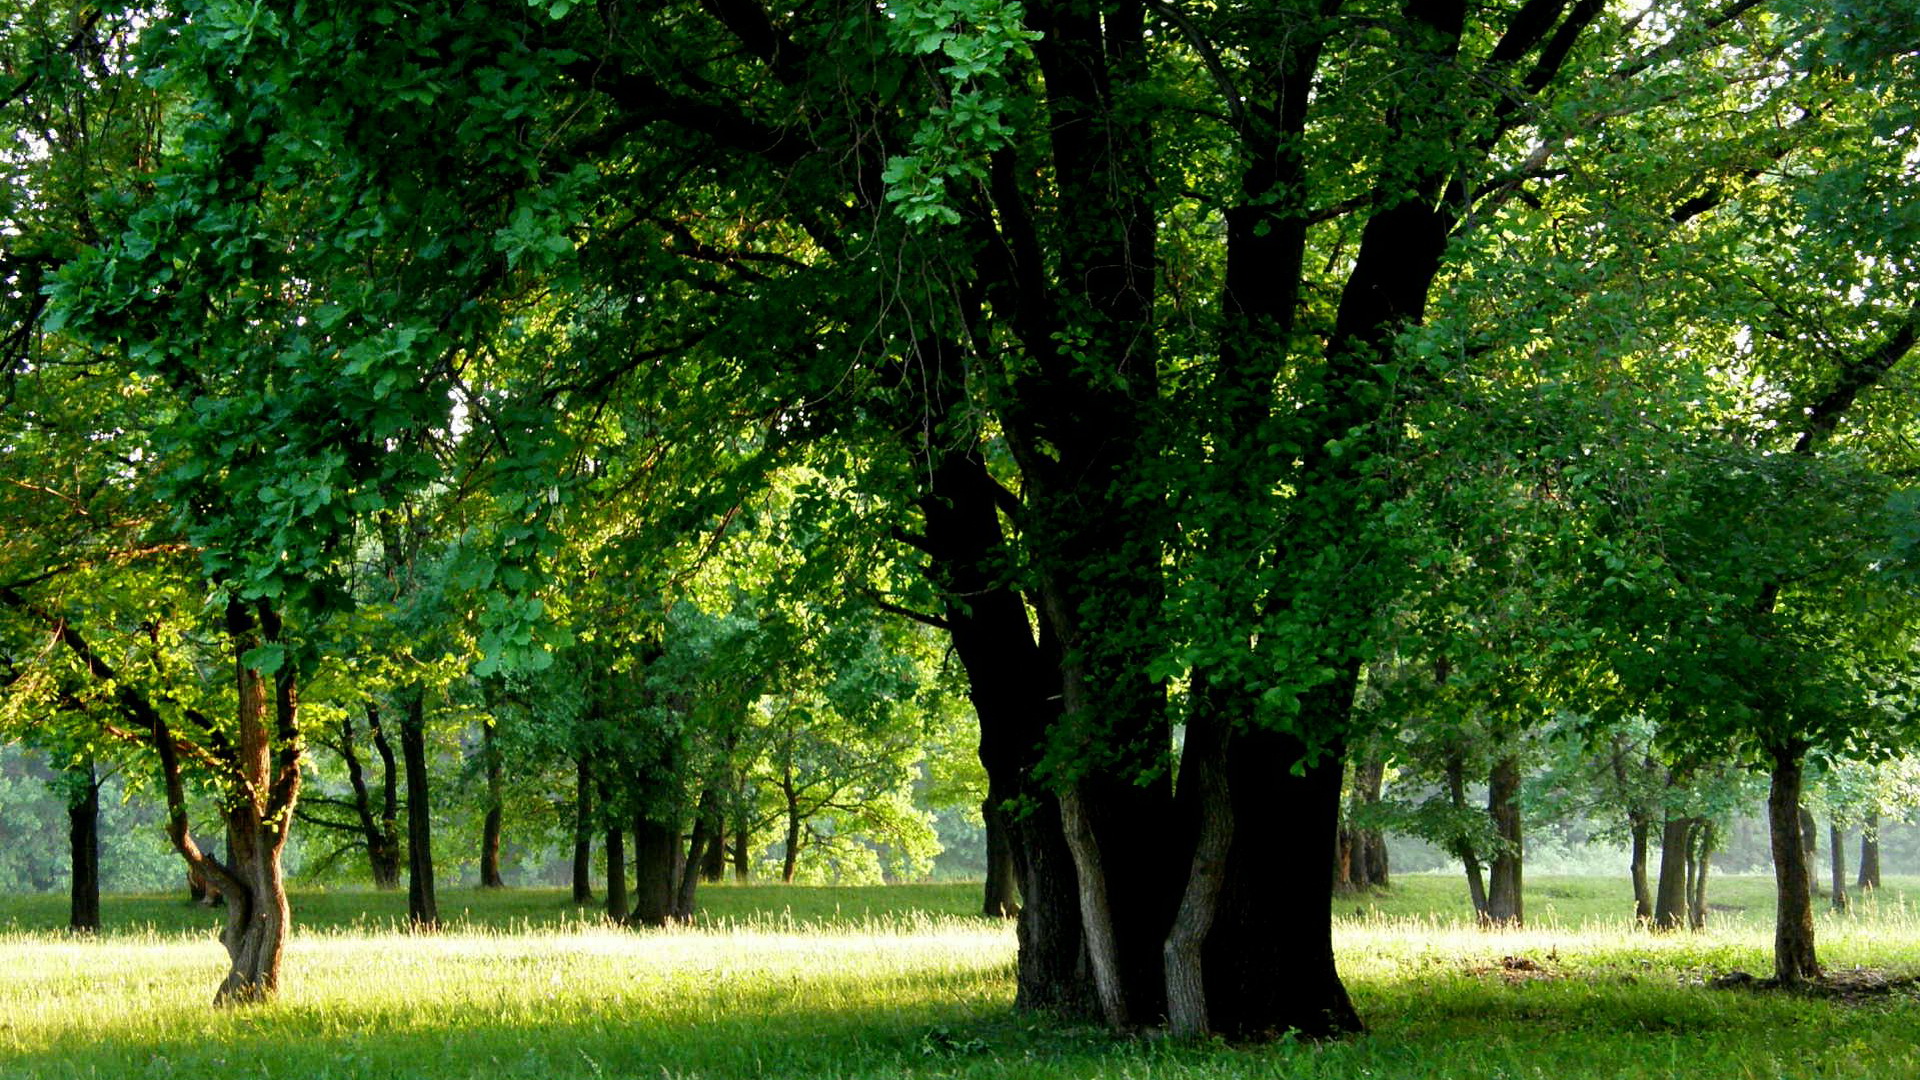 nature images - Tall and Green Trees in Prosperous Growth, Short and Green Grass--1920X1080 free wallpaper download